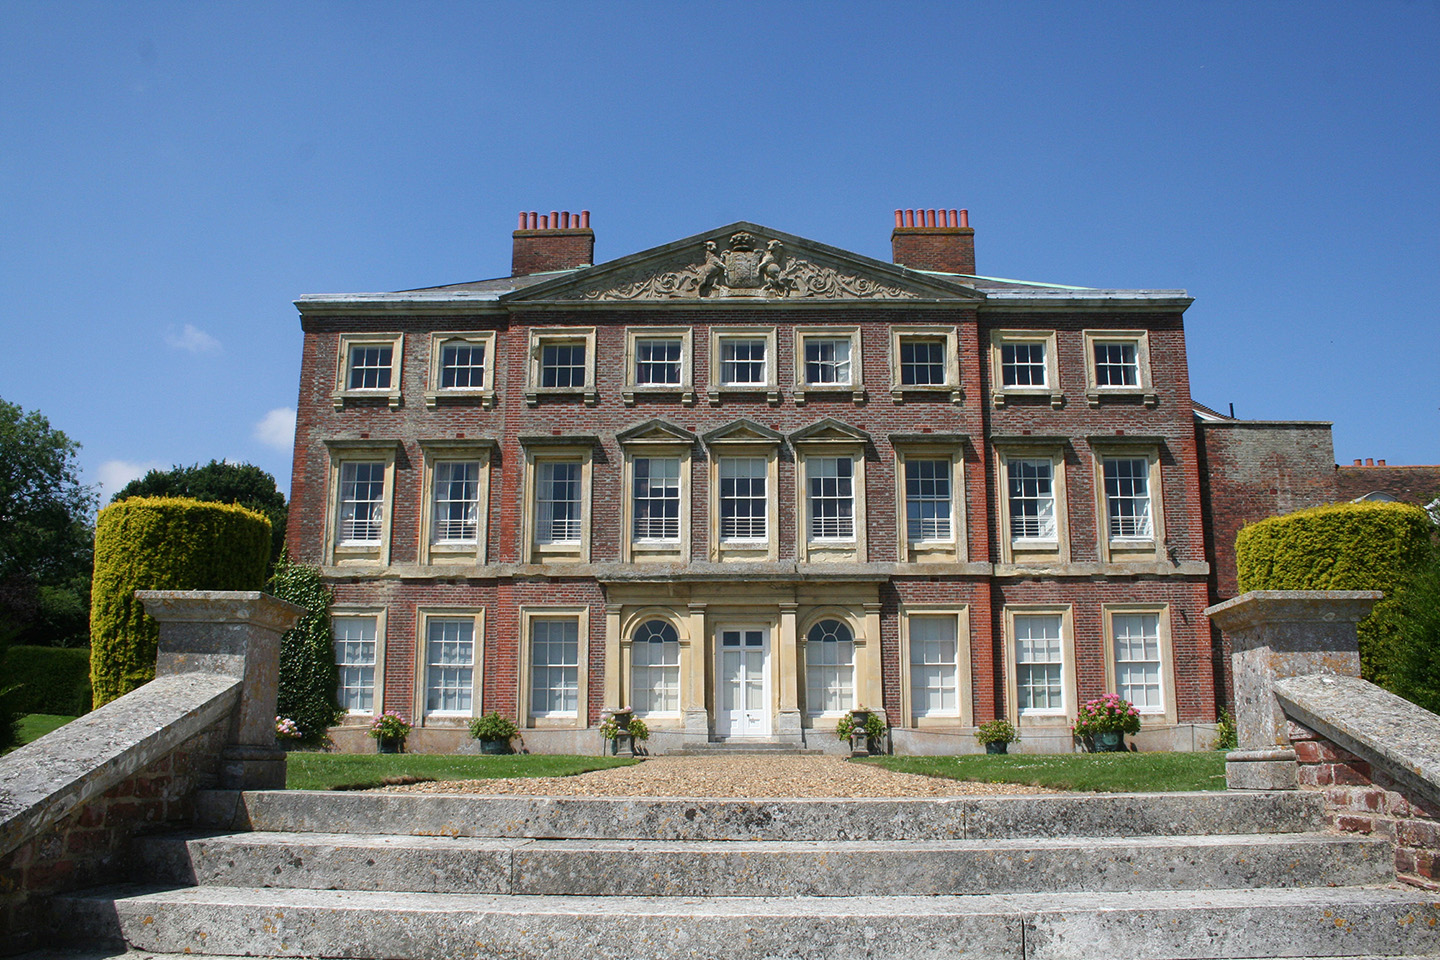 View of the grand brick house with nine windows across and three stories high